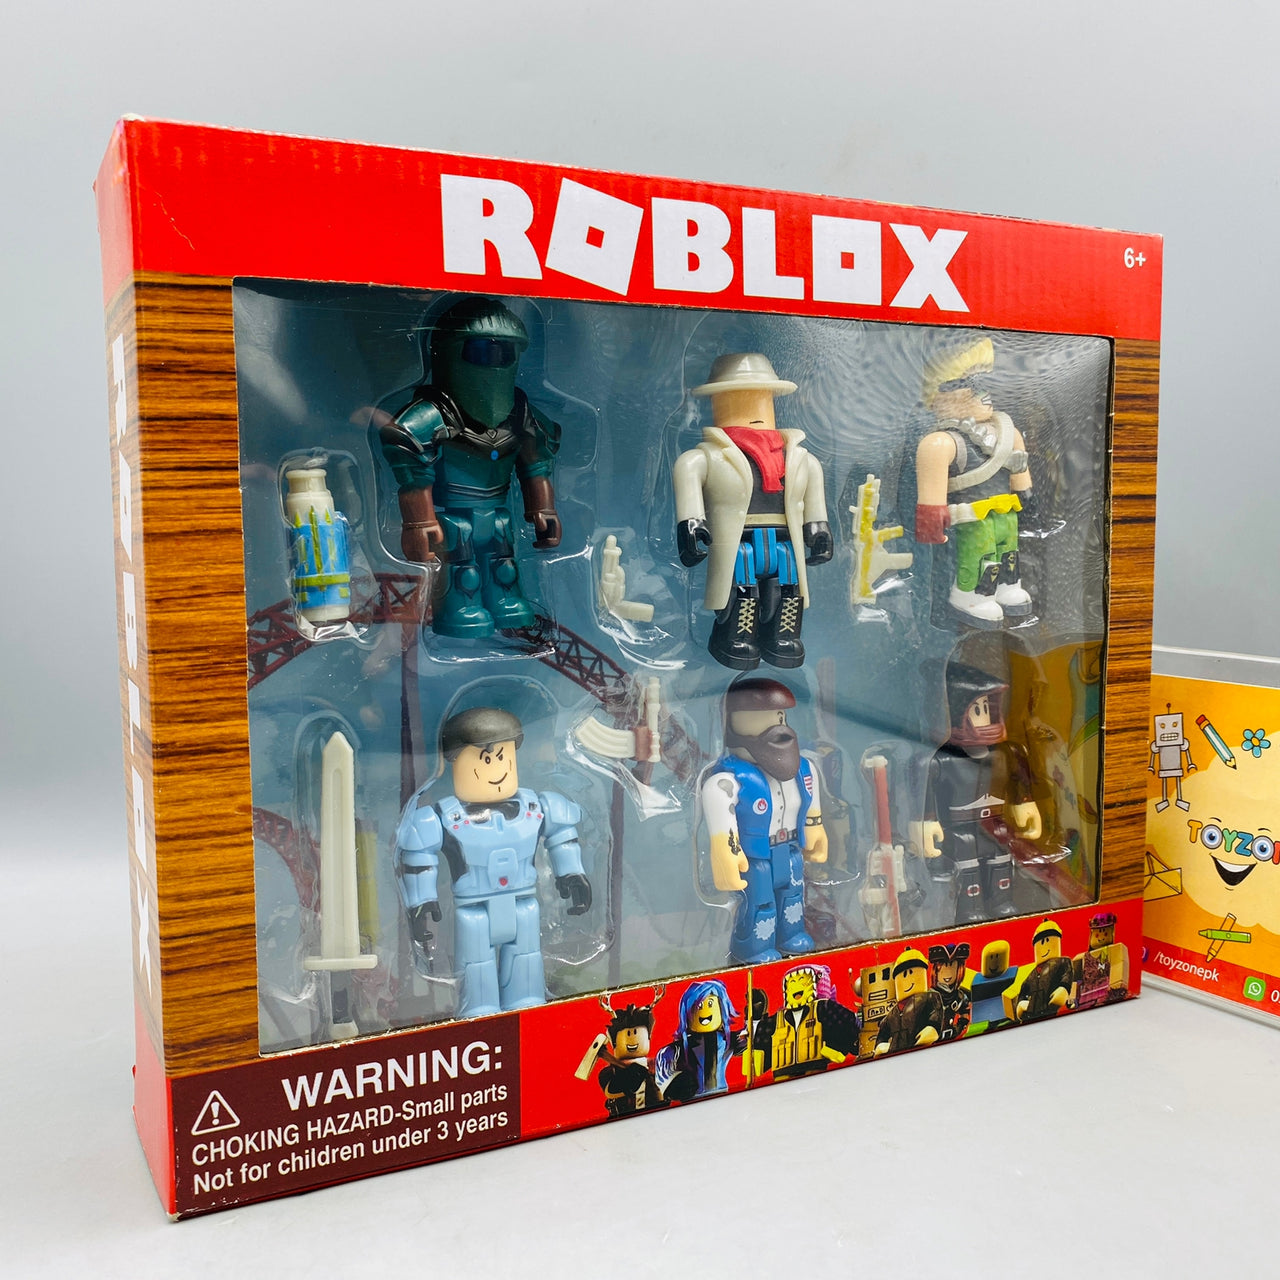 Legend Of Roblox Series Action Figure Pack Of 6